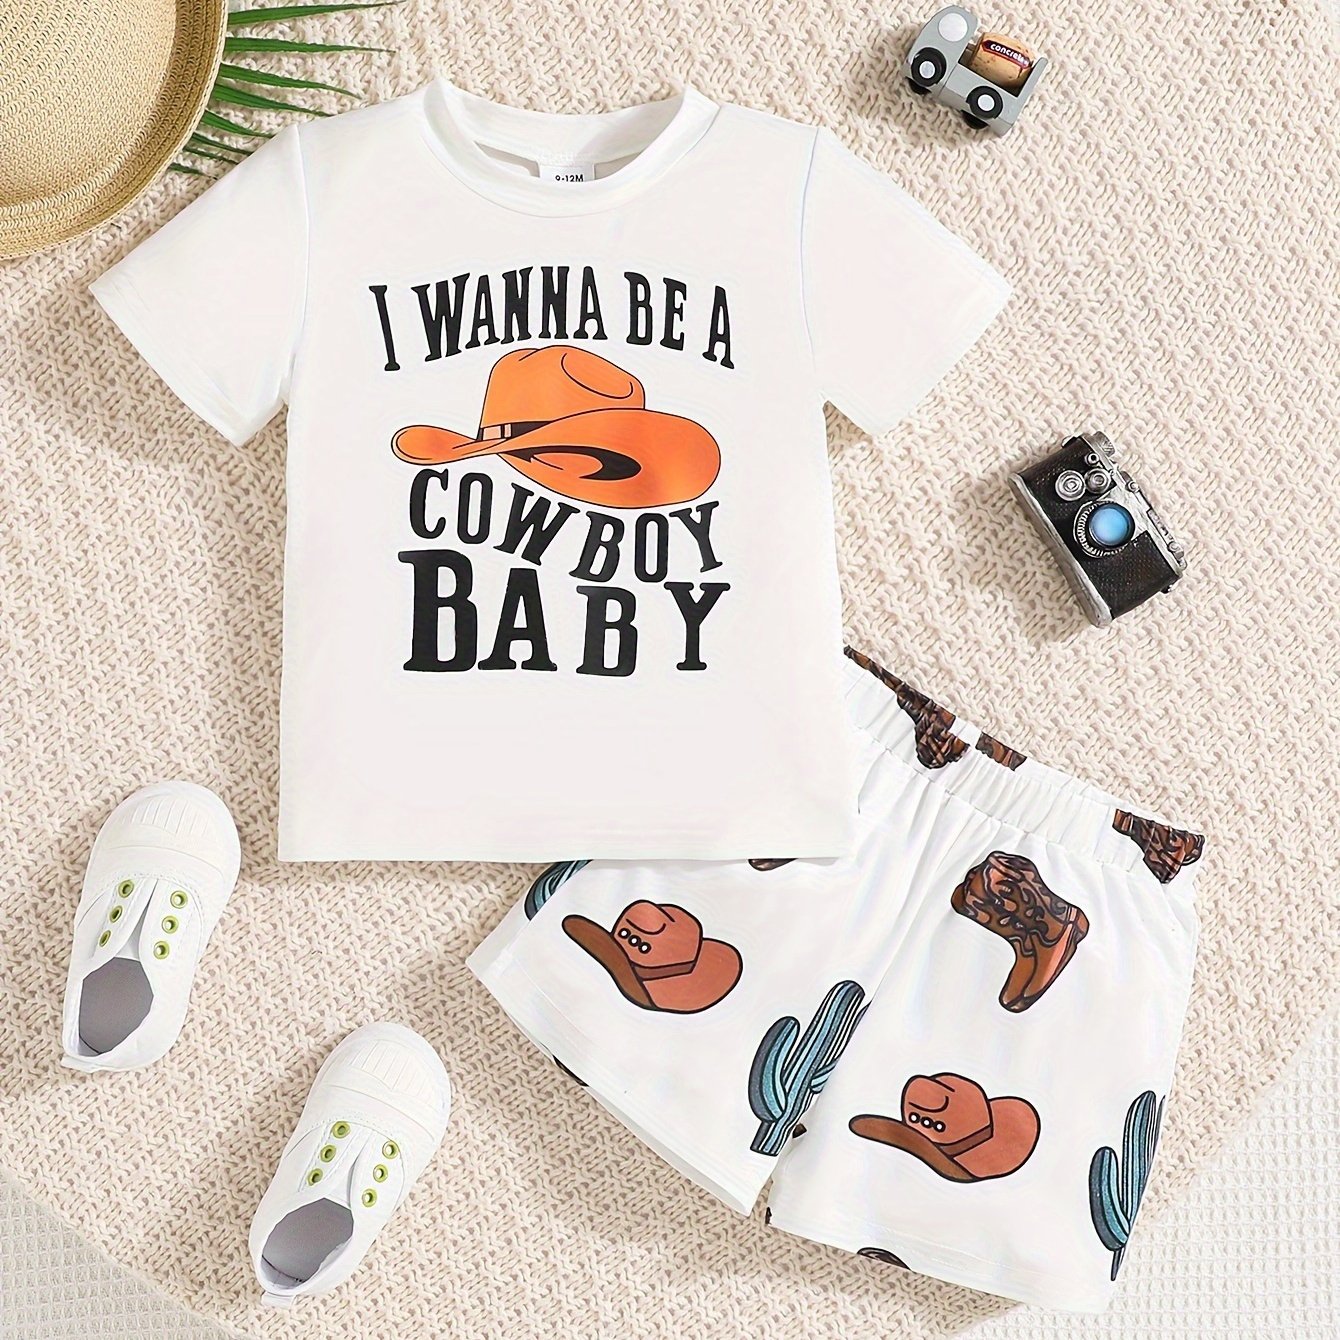 

2pcs Set For Baby Boys - " A Cowboy Baby" Printed T-shirt & Western Cowboy Pattern Shorts, Cute Casual Summer Outfit For Newborns